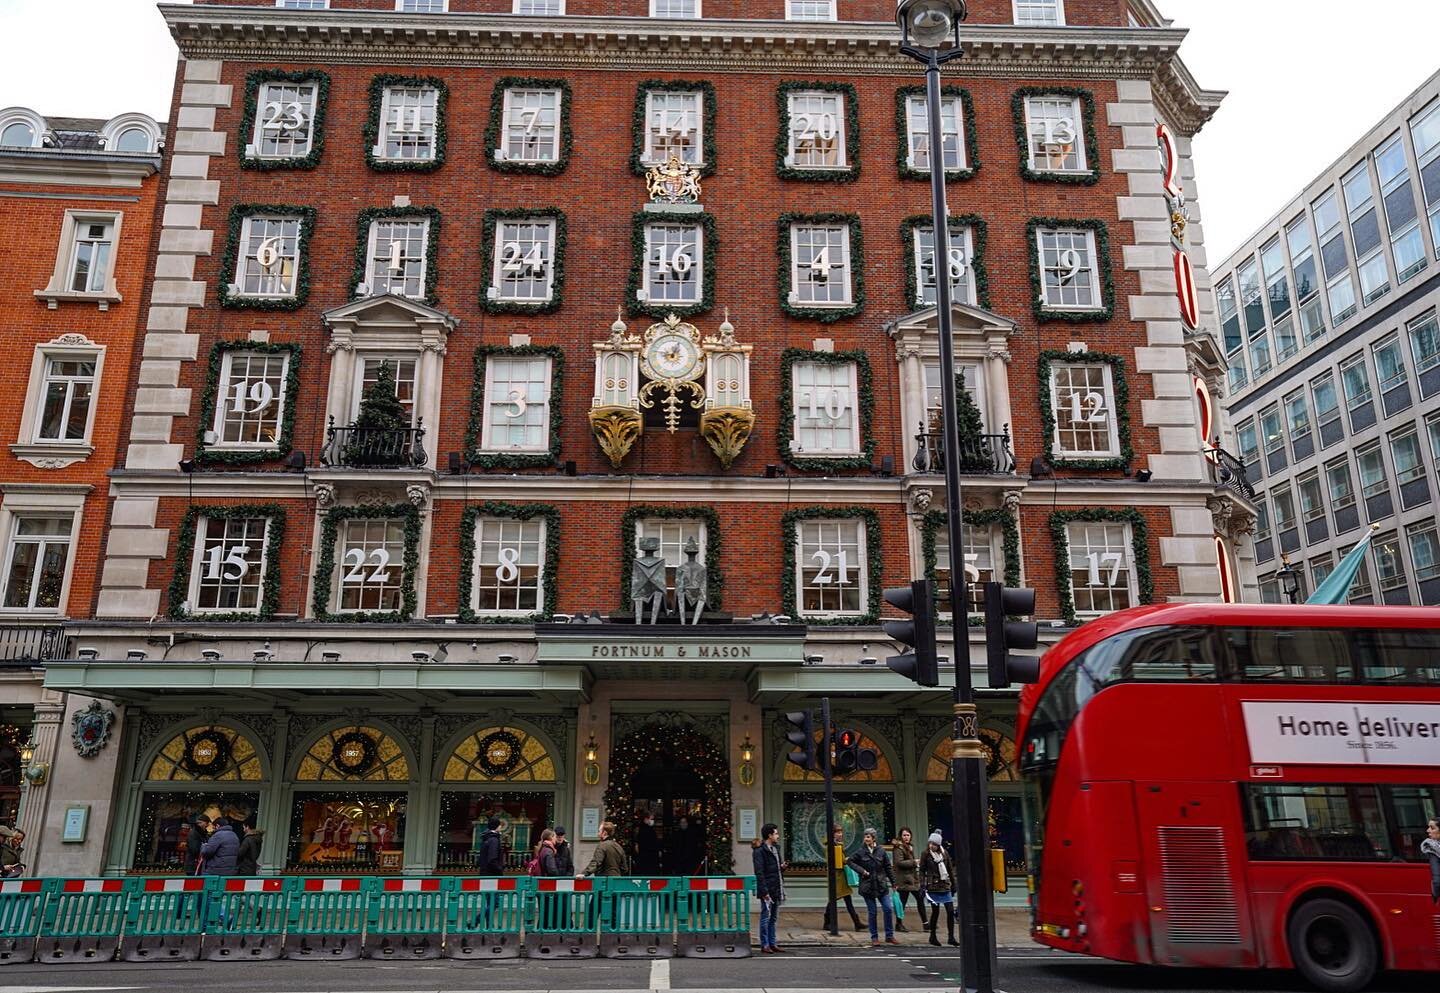 The legendary Fortnum &amp; Mason all dressed up as an advent calendar. Took a marathon walk around the west end today to get myself into the holiday spirit.

#london #england #londonbus #fortnumandmason #piccadilly #holidayseason #adventcalendar #ur